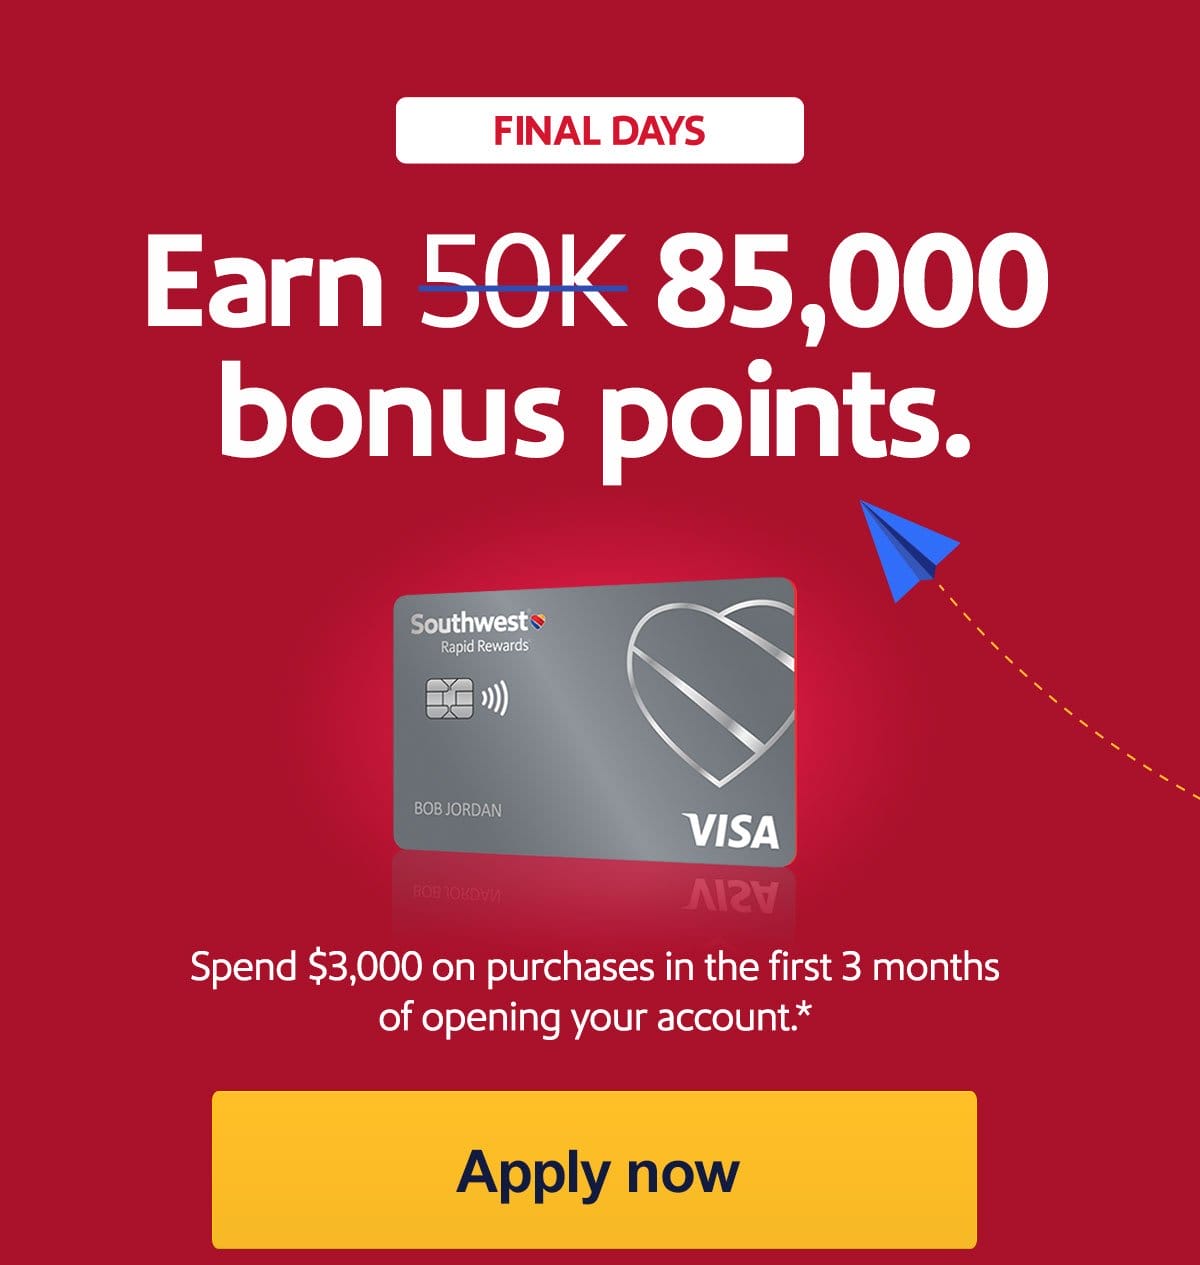 Final Days. Earn 85,000 bonus points. Spend \\$3,000 on purchases in the first 3 months of opening your account.* [Apply now]